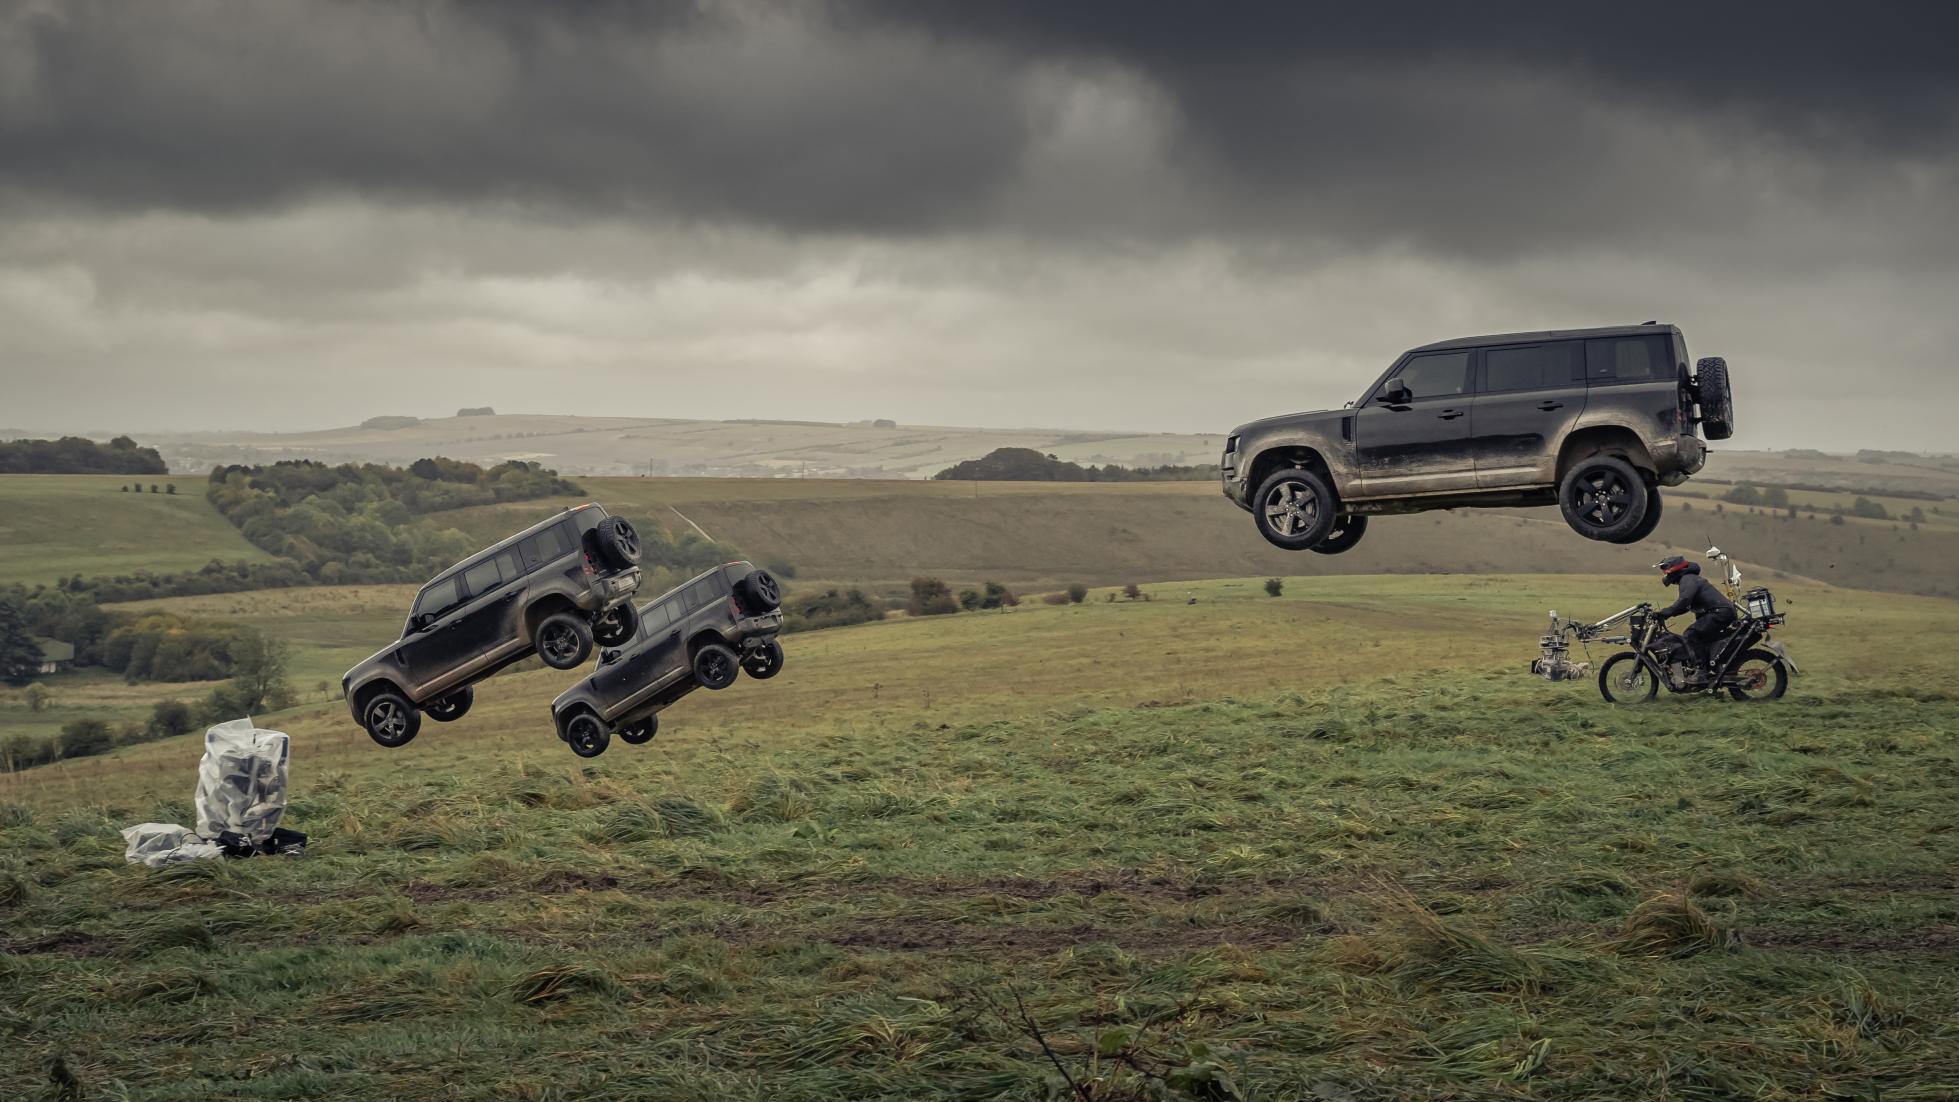 Video: The new Land Rover Defender can fly